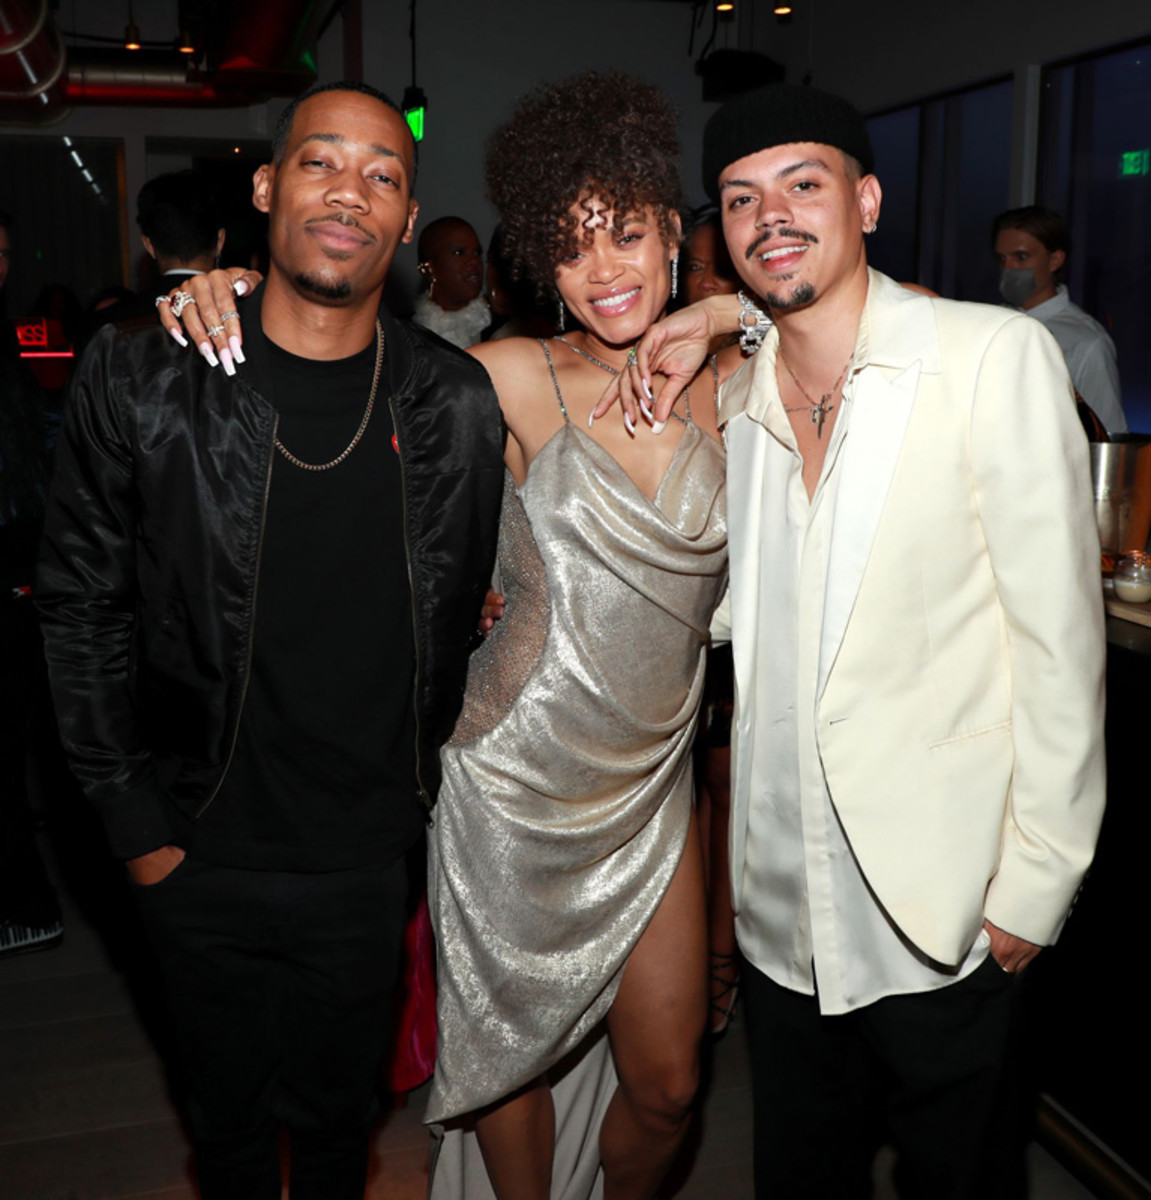 The United States vs. Billie Holiday cast members Tyler James Williams, Andra Day, and Evan Ross